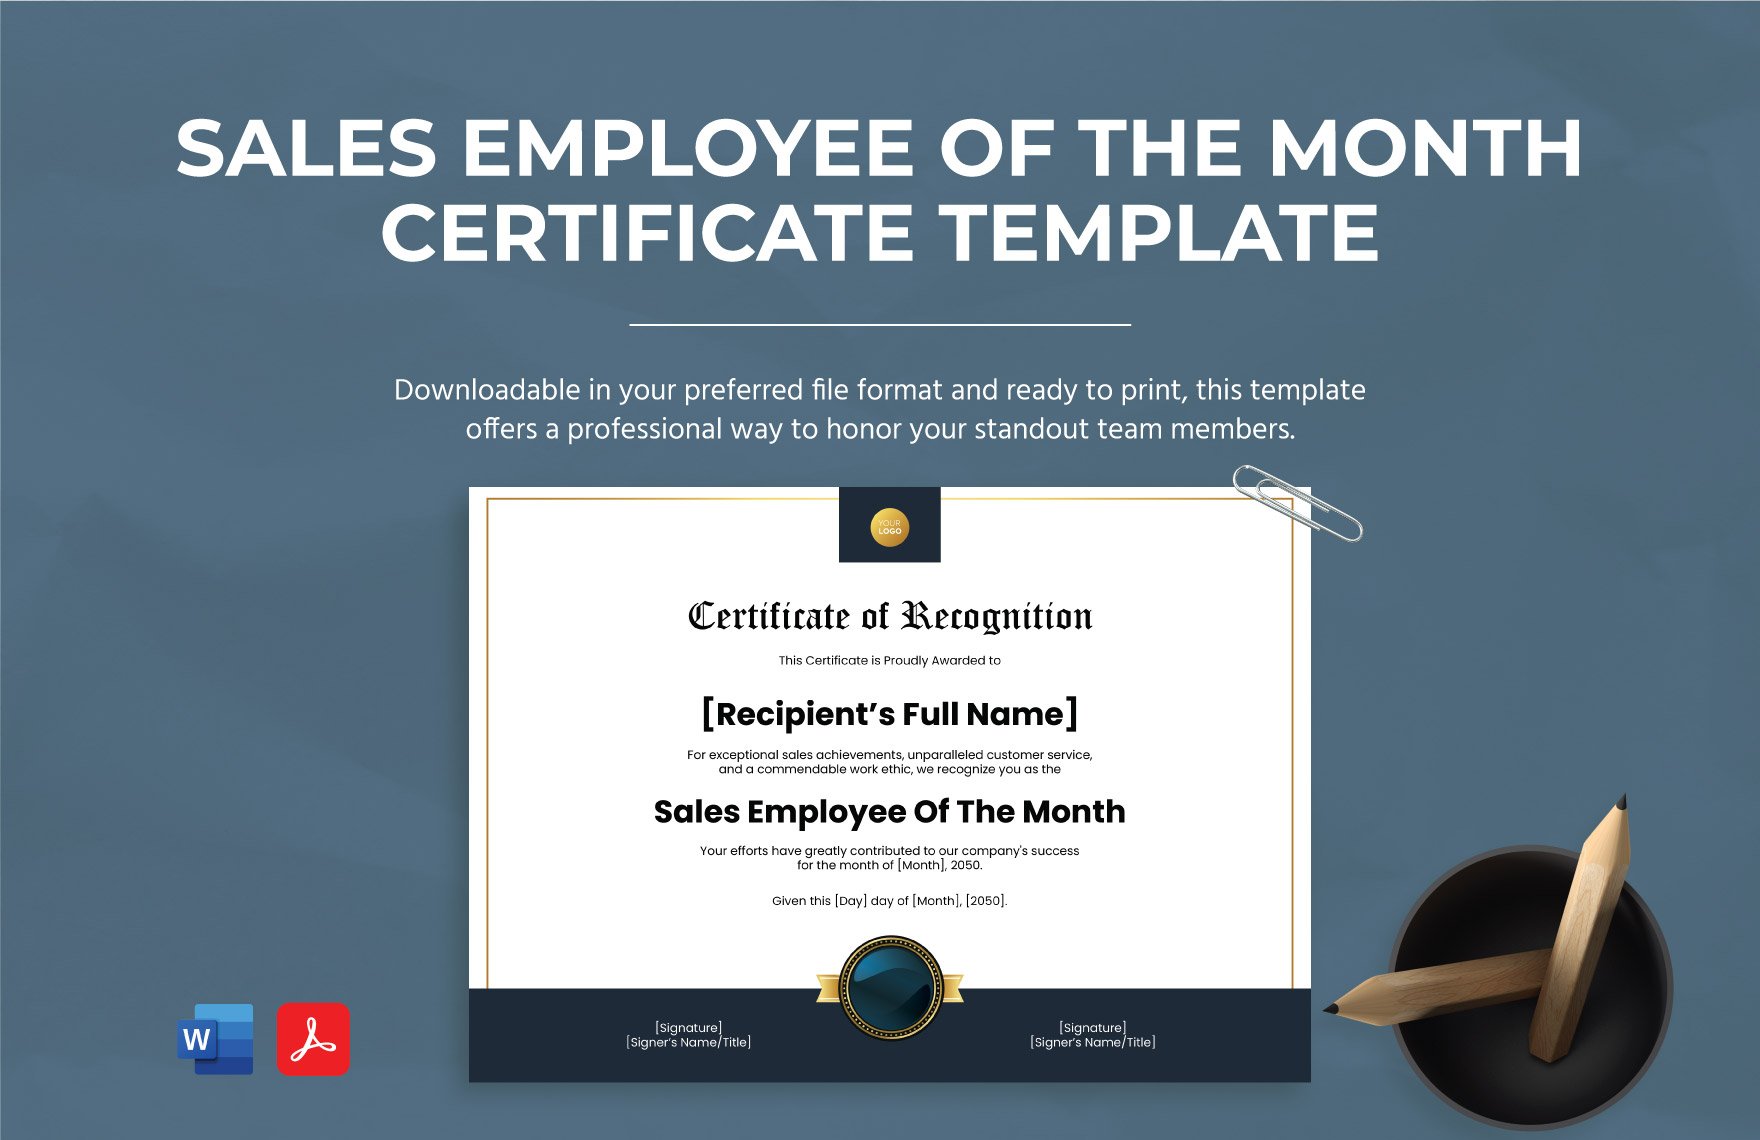 Sales Employee of the Month Certificate Template